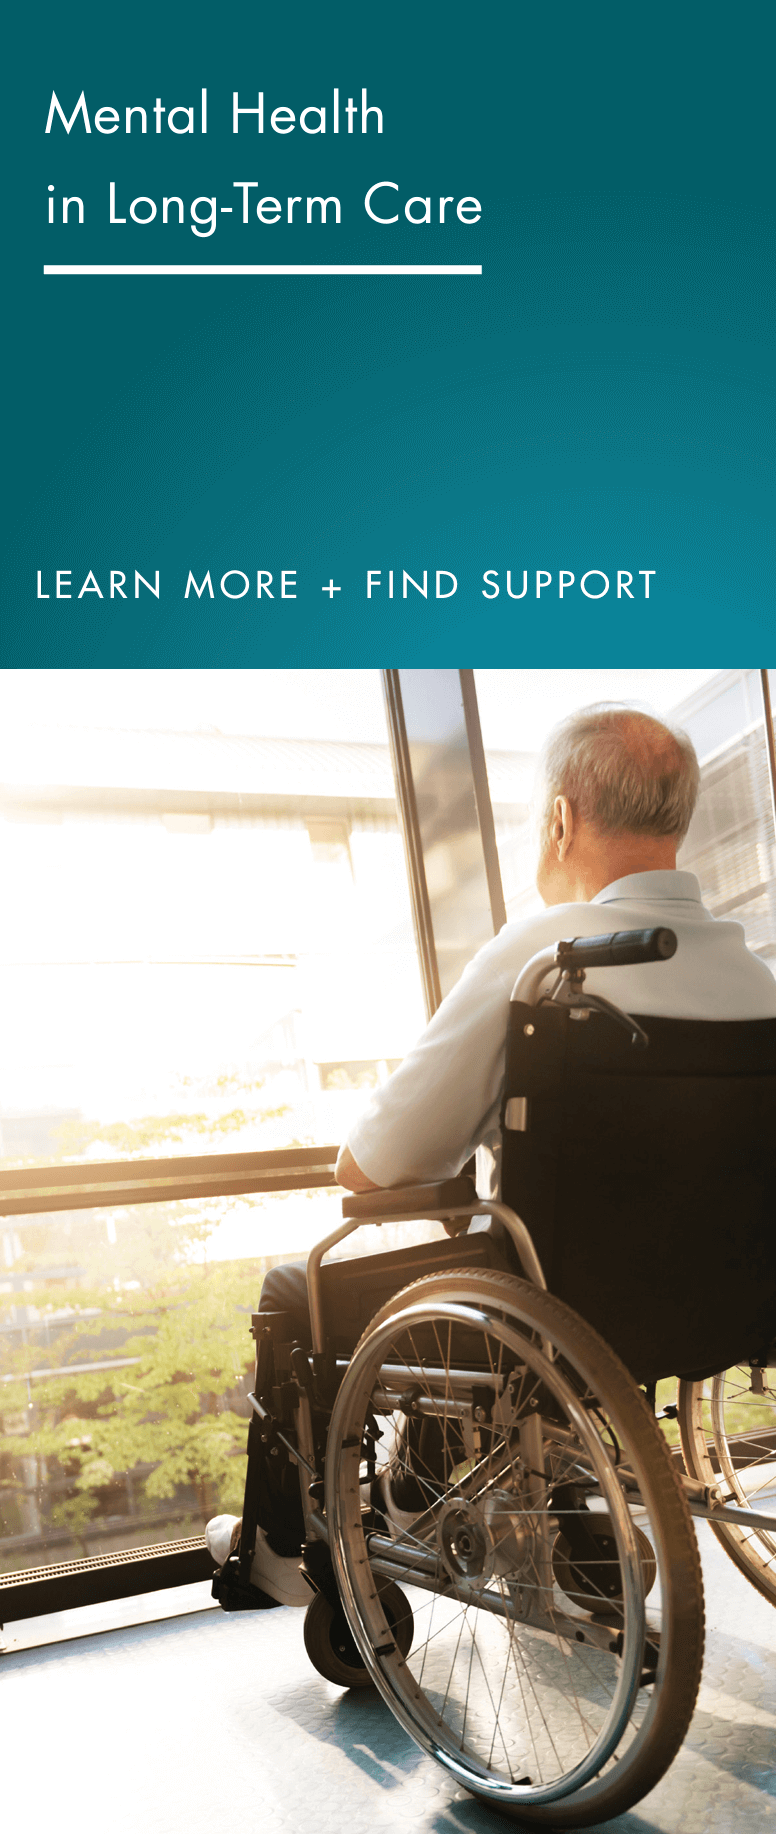 Brochure cover with a photo of a older man in a wheelchair looking out a window at some greenery.